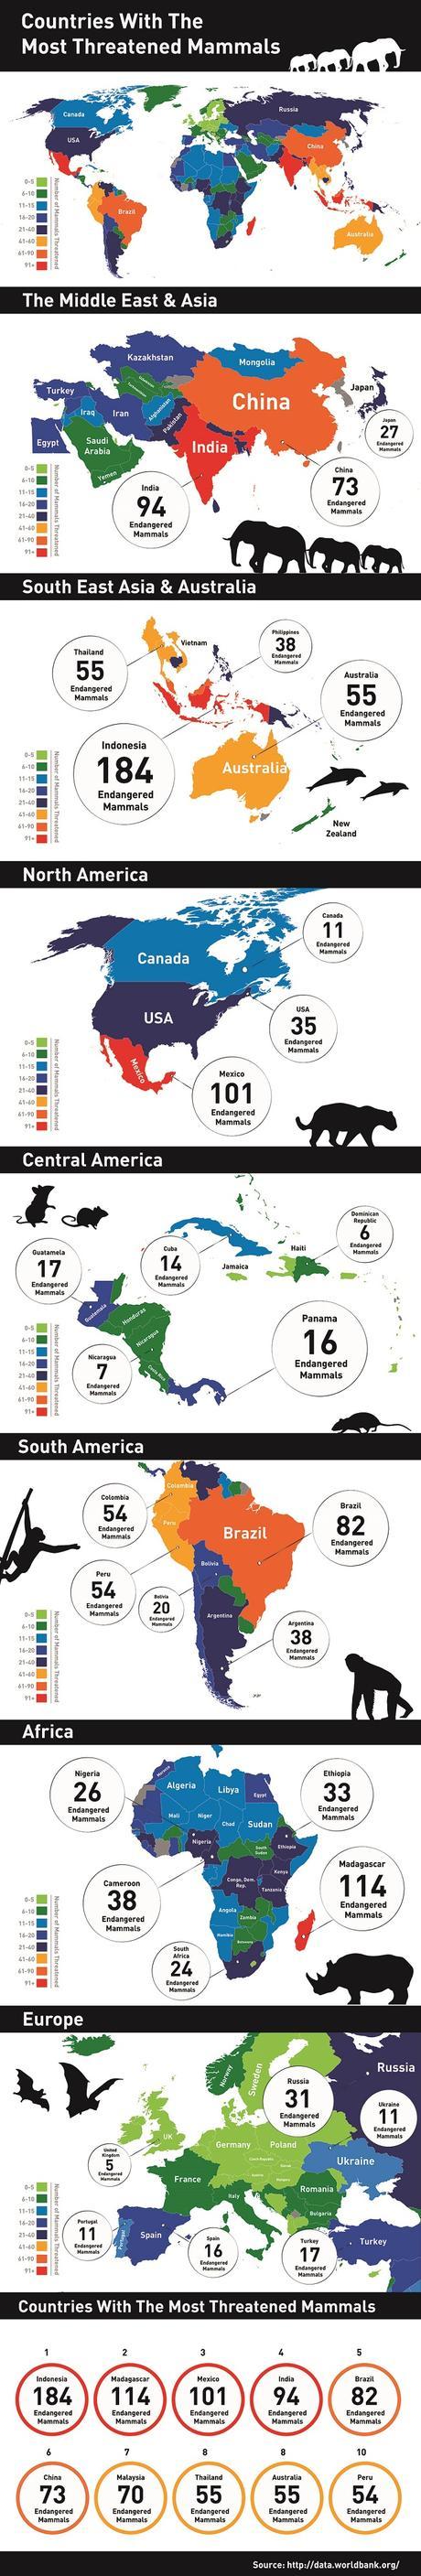 world map showing number of mammals at risk